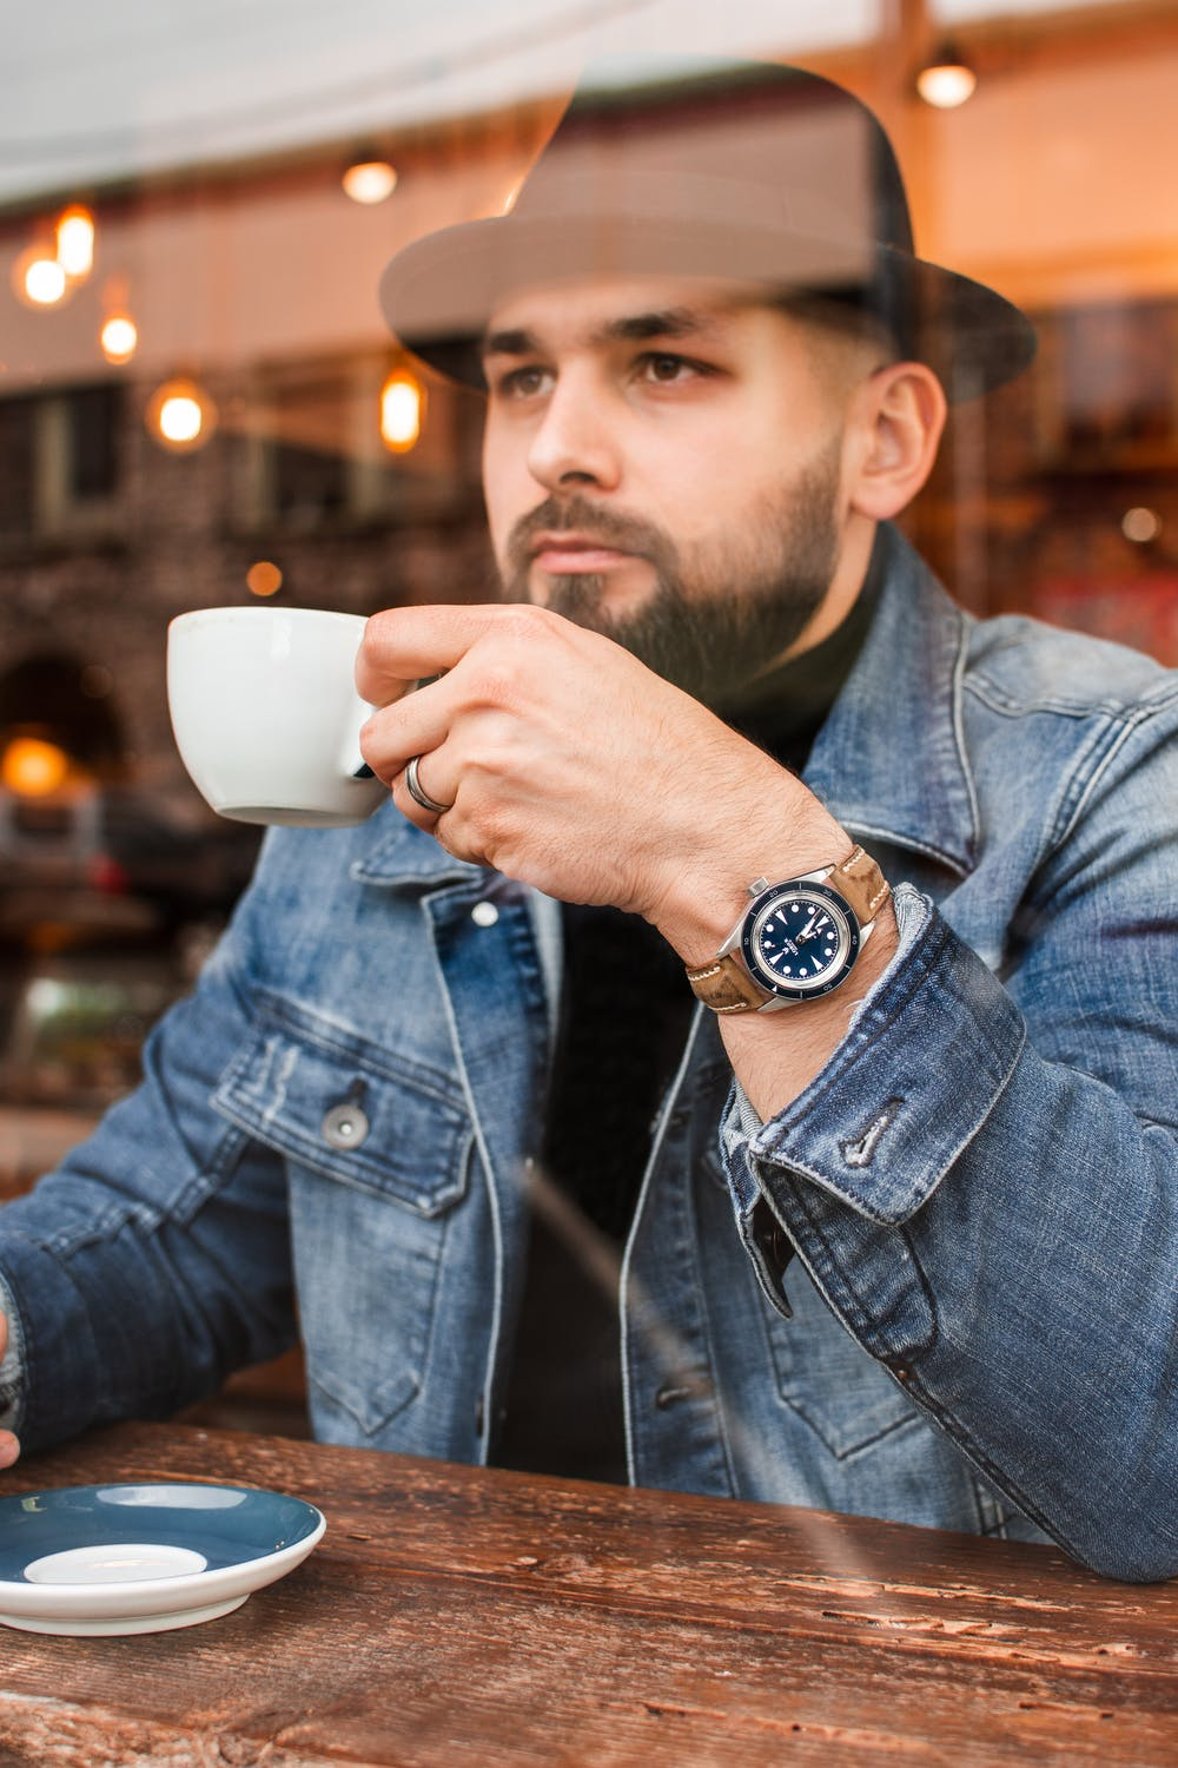 Male and Females Wanted for Watch Brand Photoshoot in the UK!